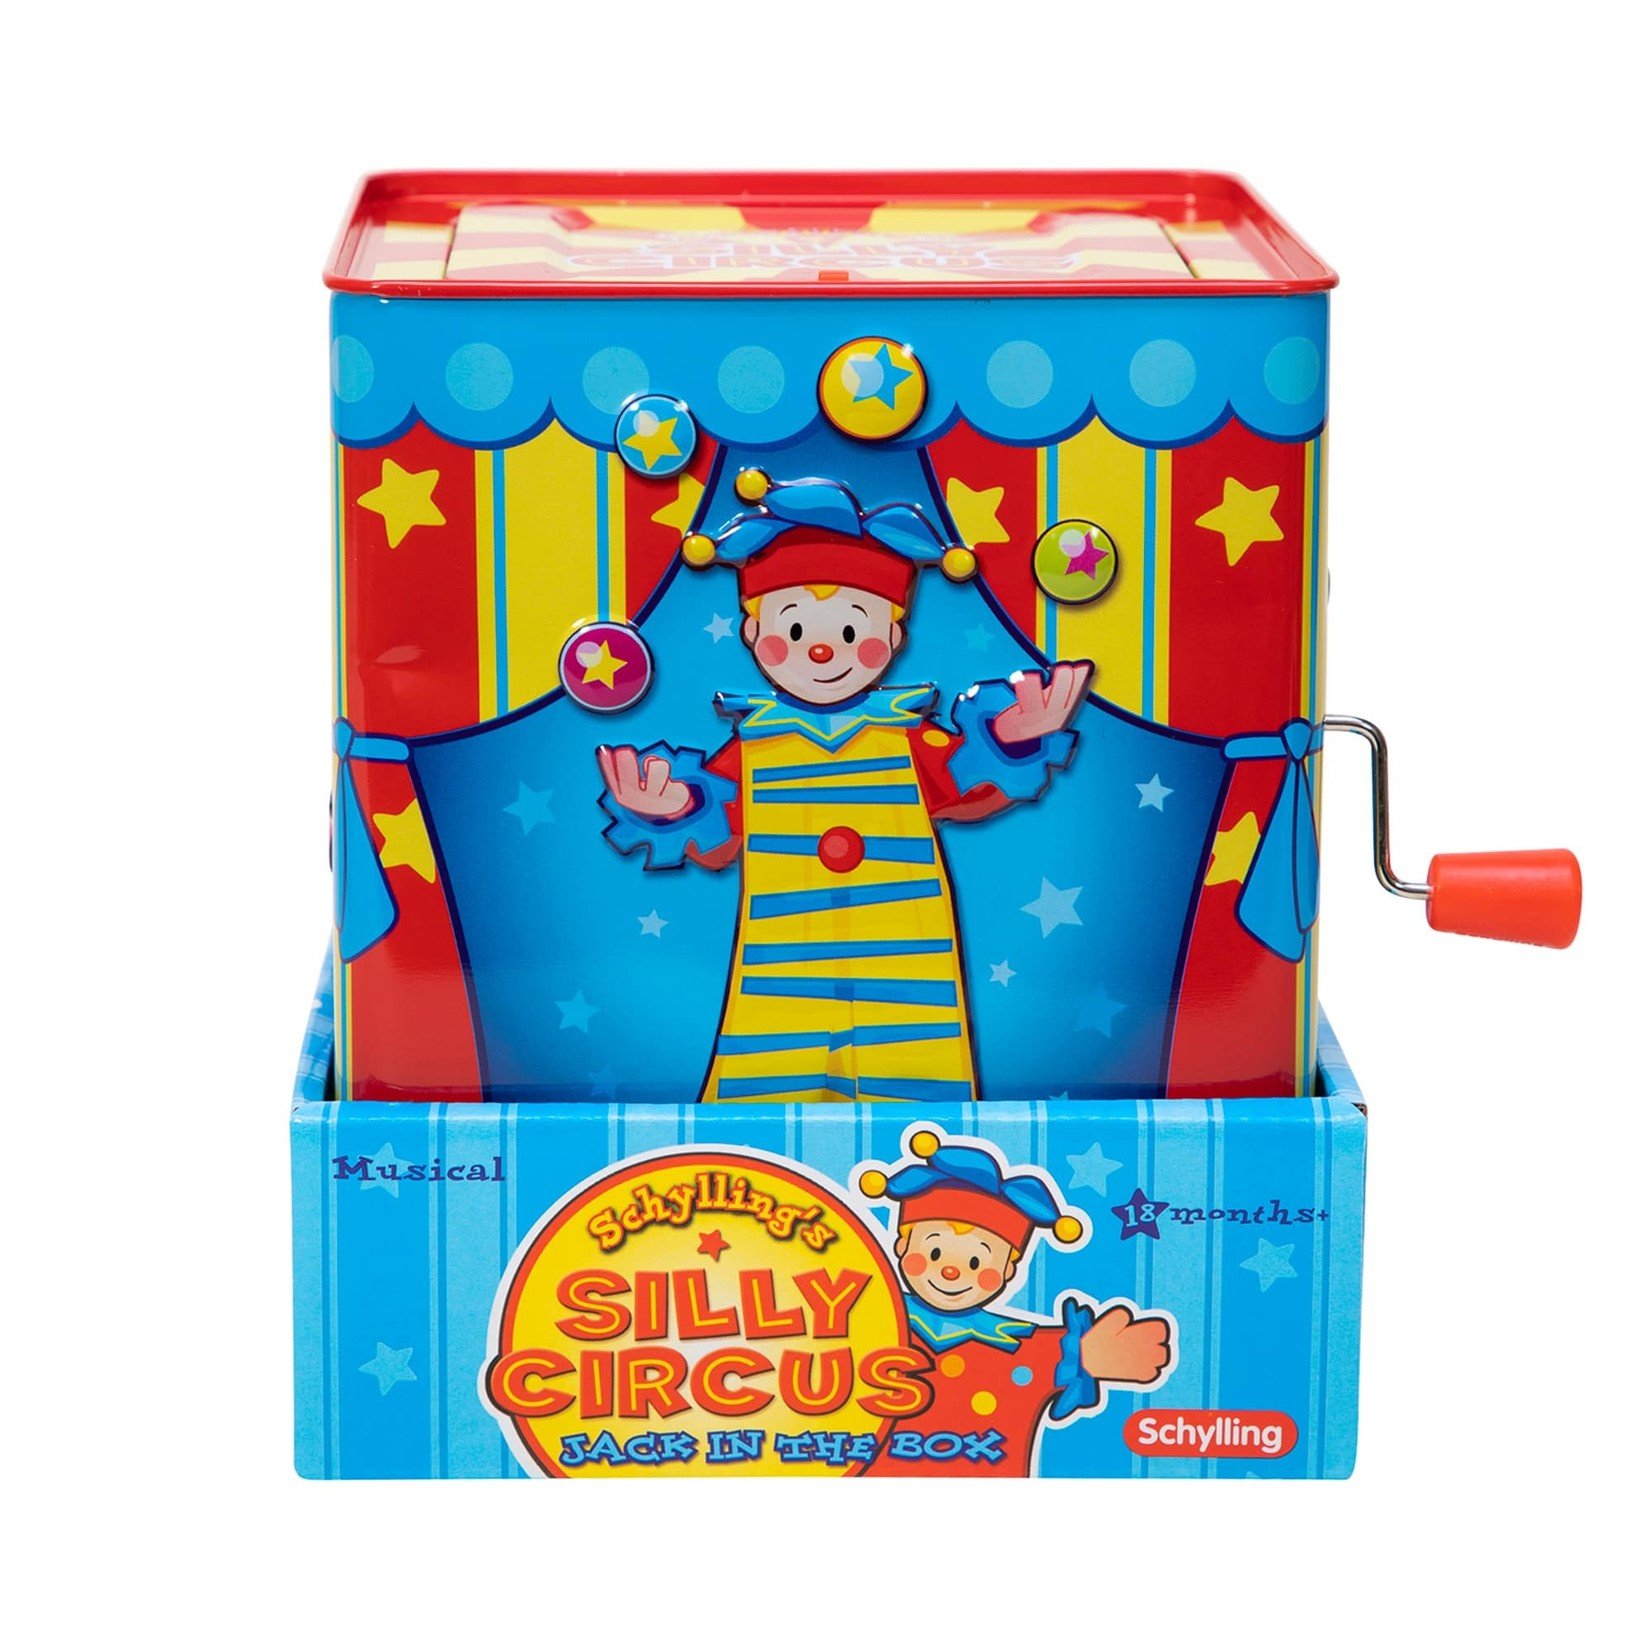 Schylling Jack in the Box Musical Silly Circus Toy Delight Child Kids Gift 